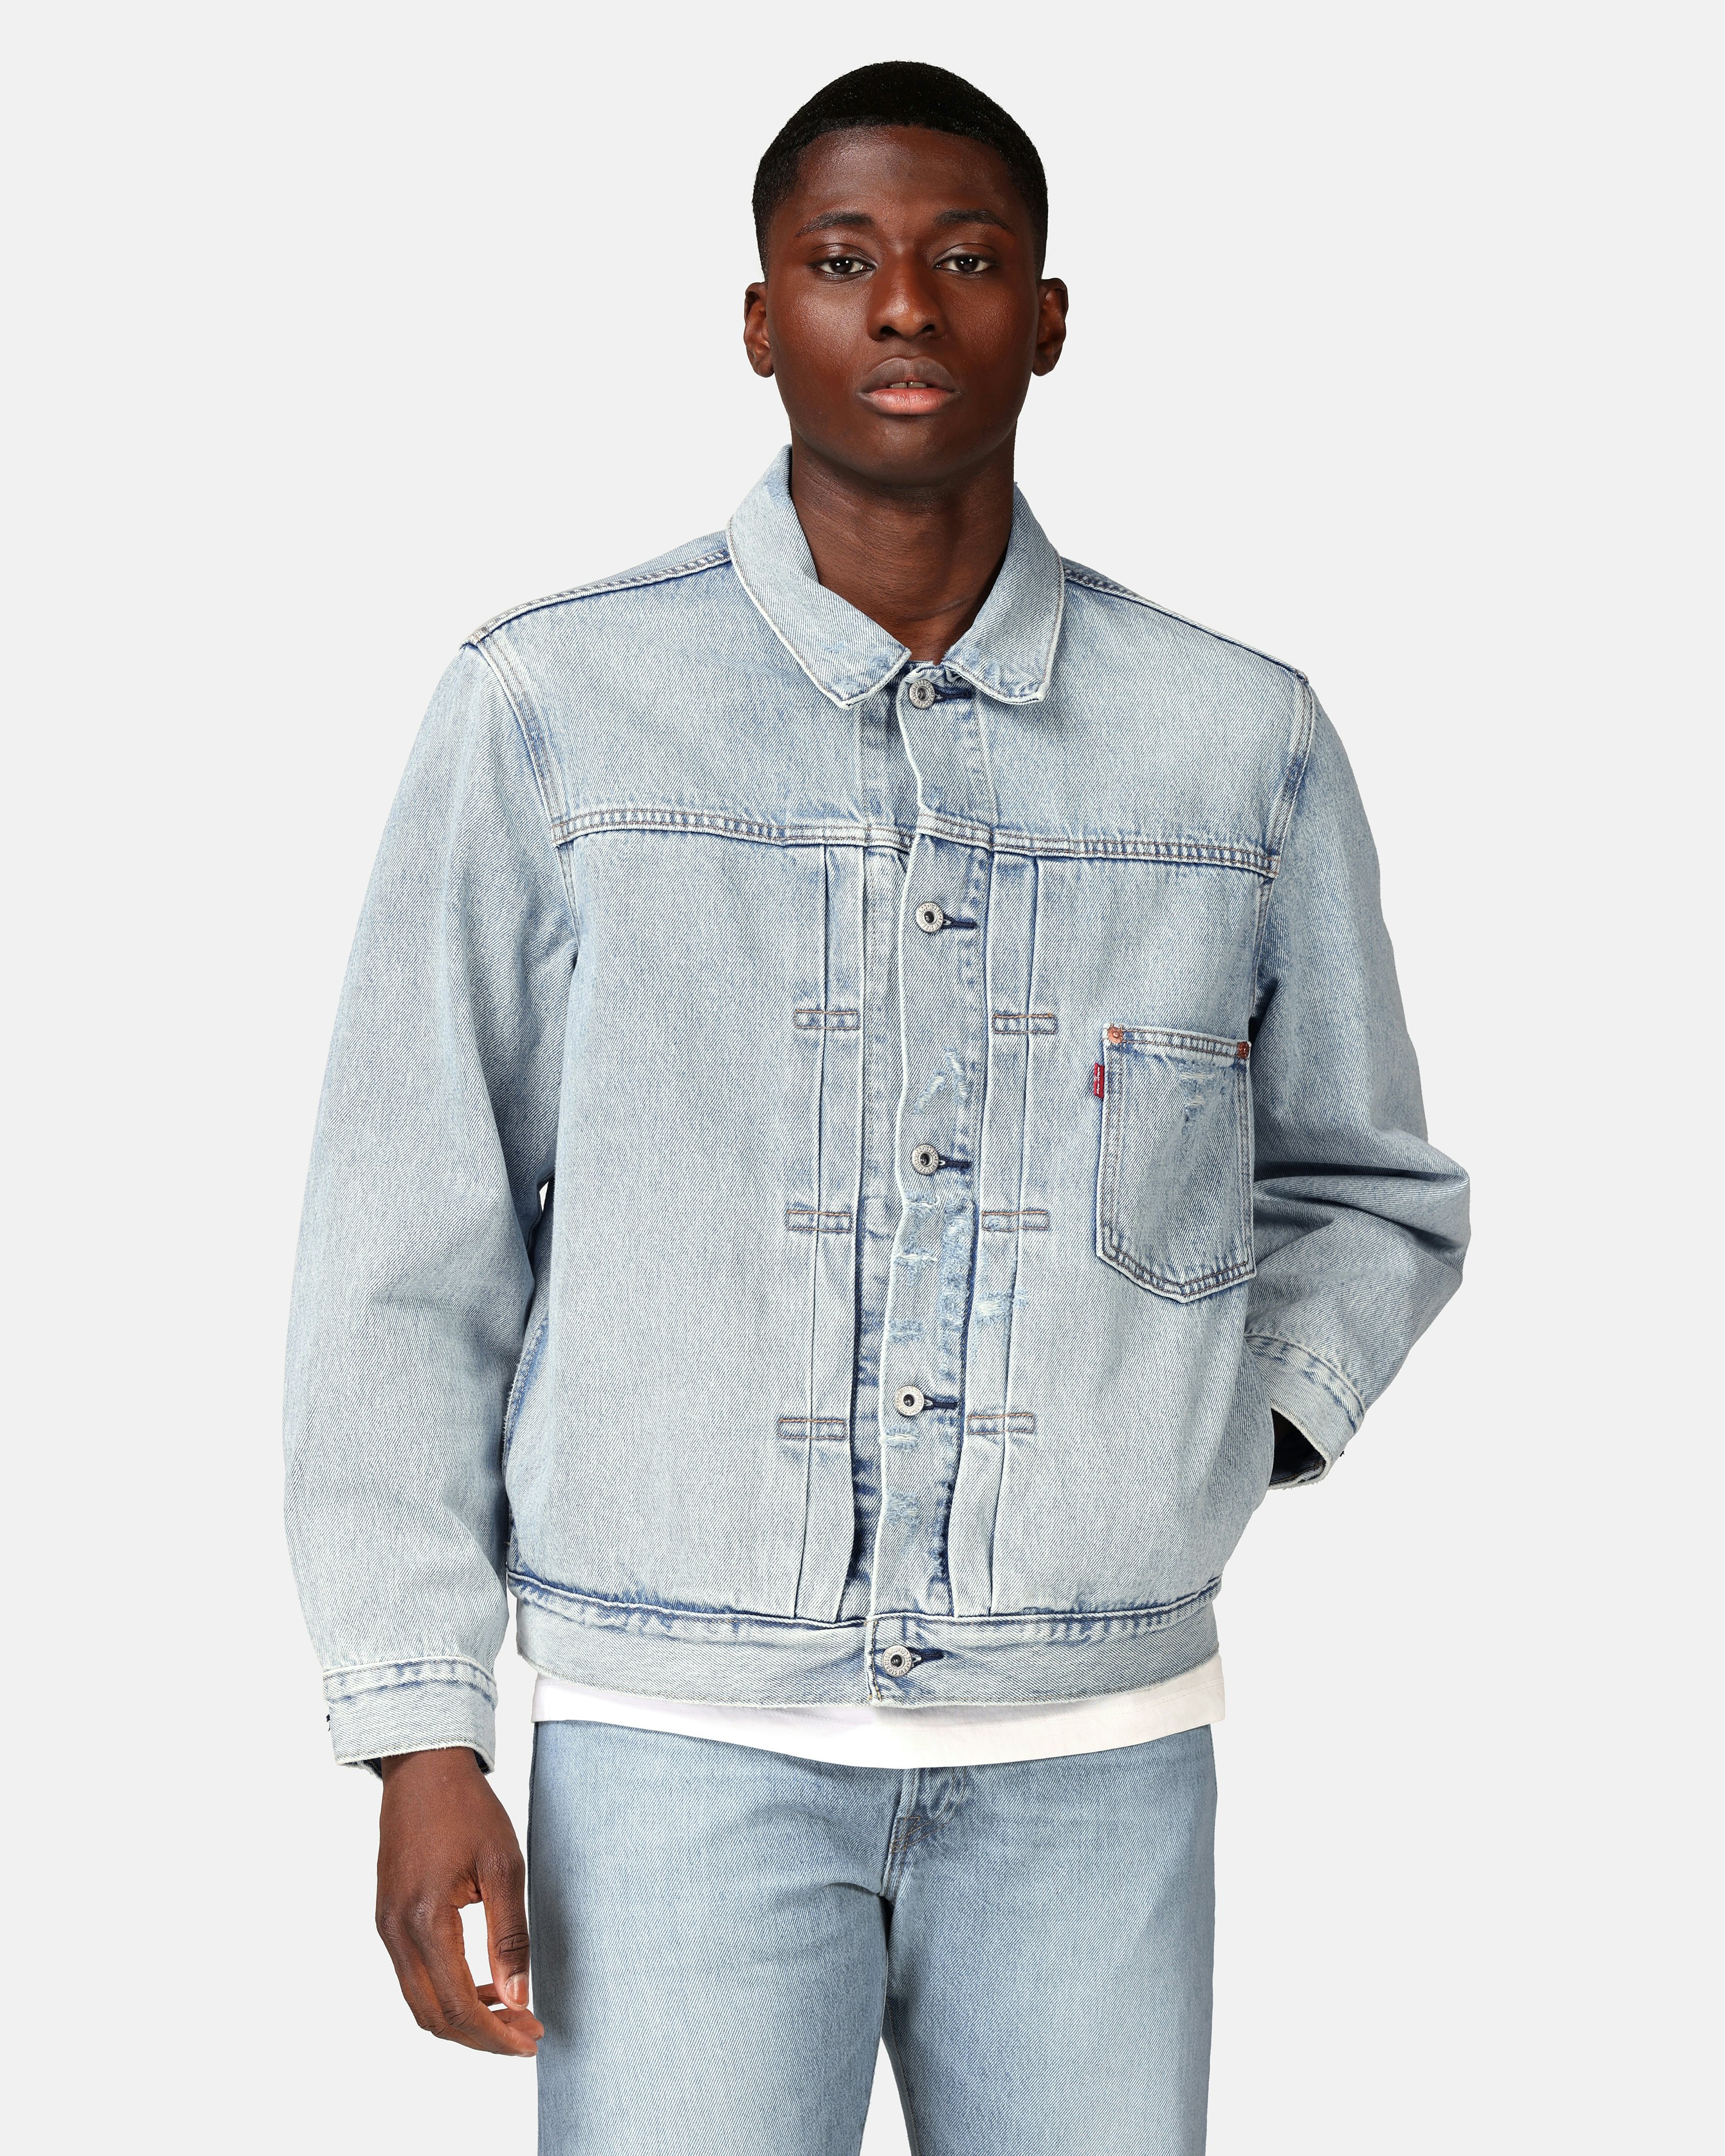 Sale on 500+ Denim Jackets offers and gifts | Stylight